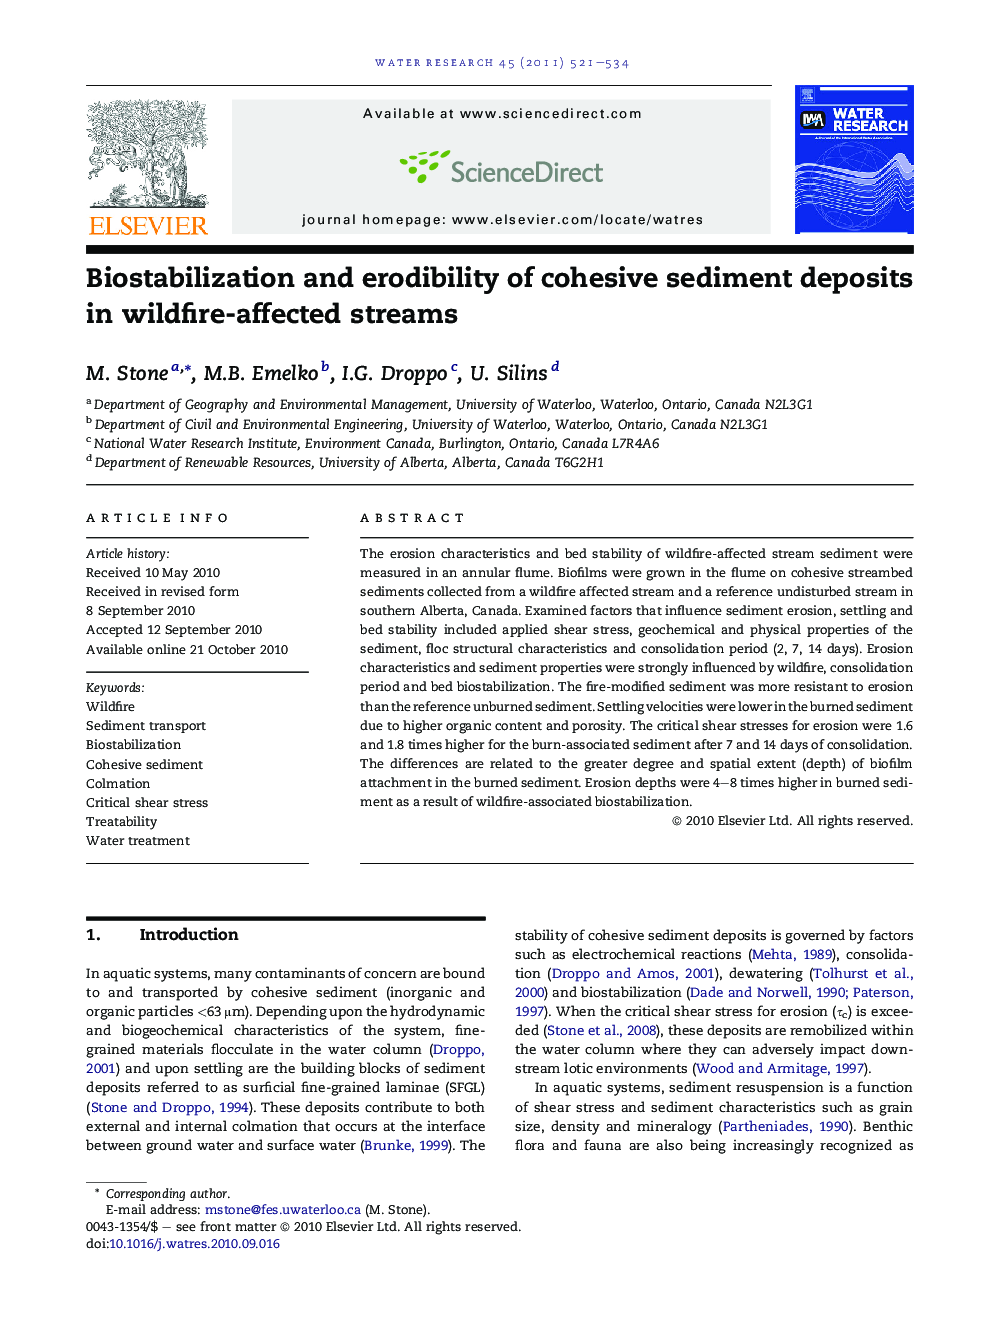 Biostabilization and erodibility of cohesive sediment deposits in wildfire-affected streams